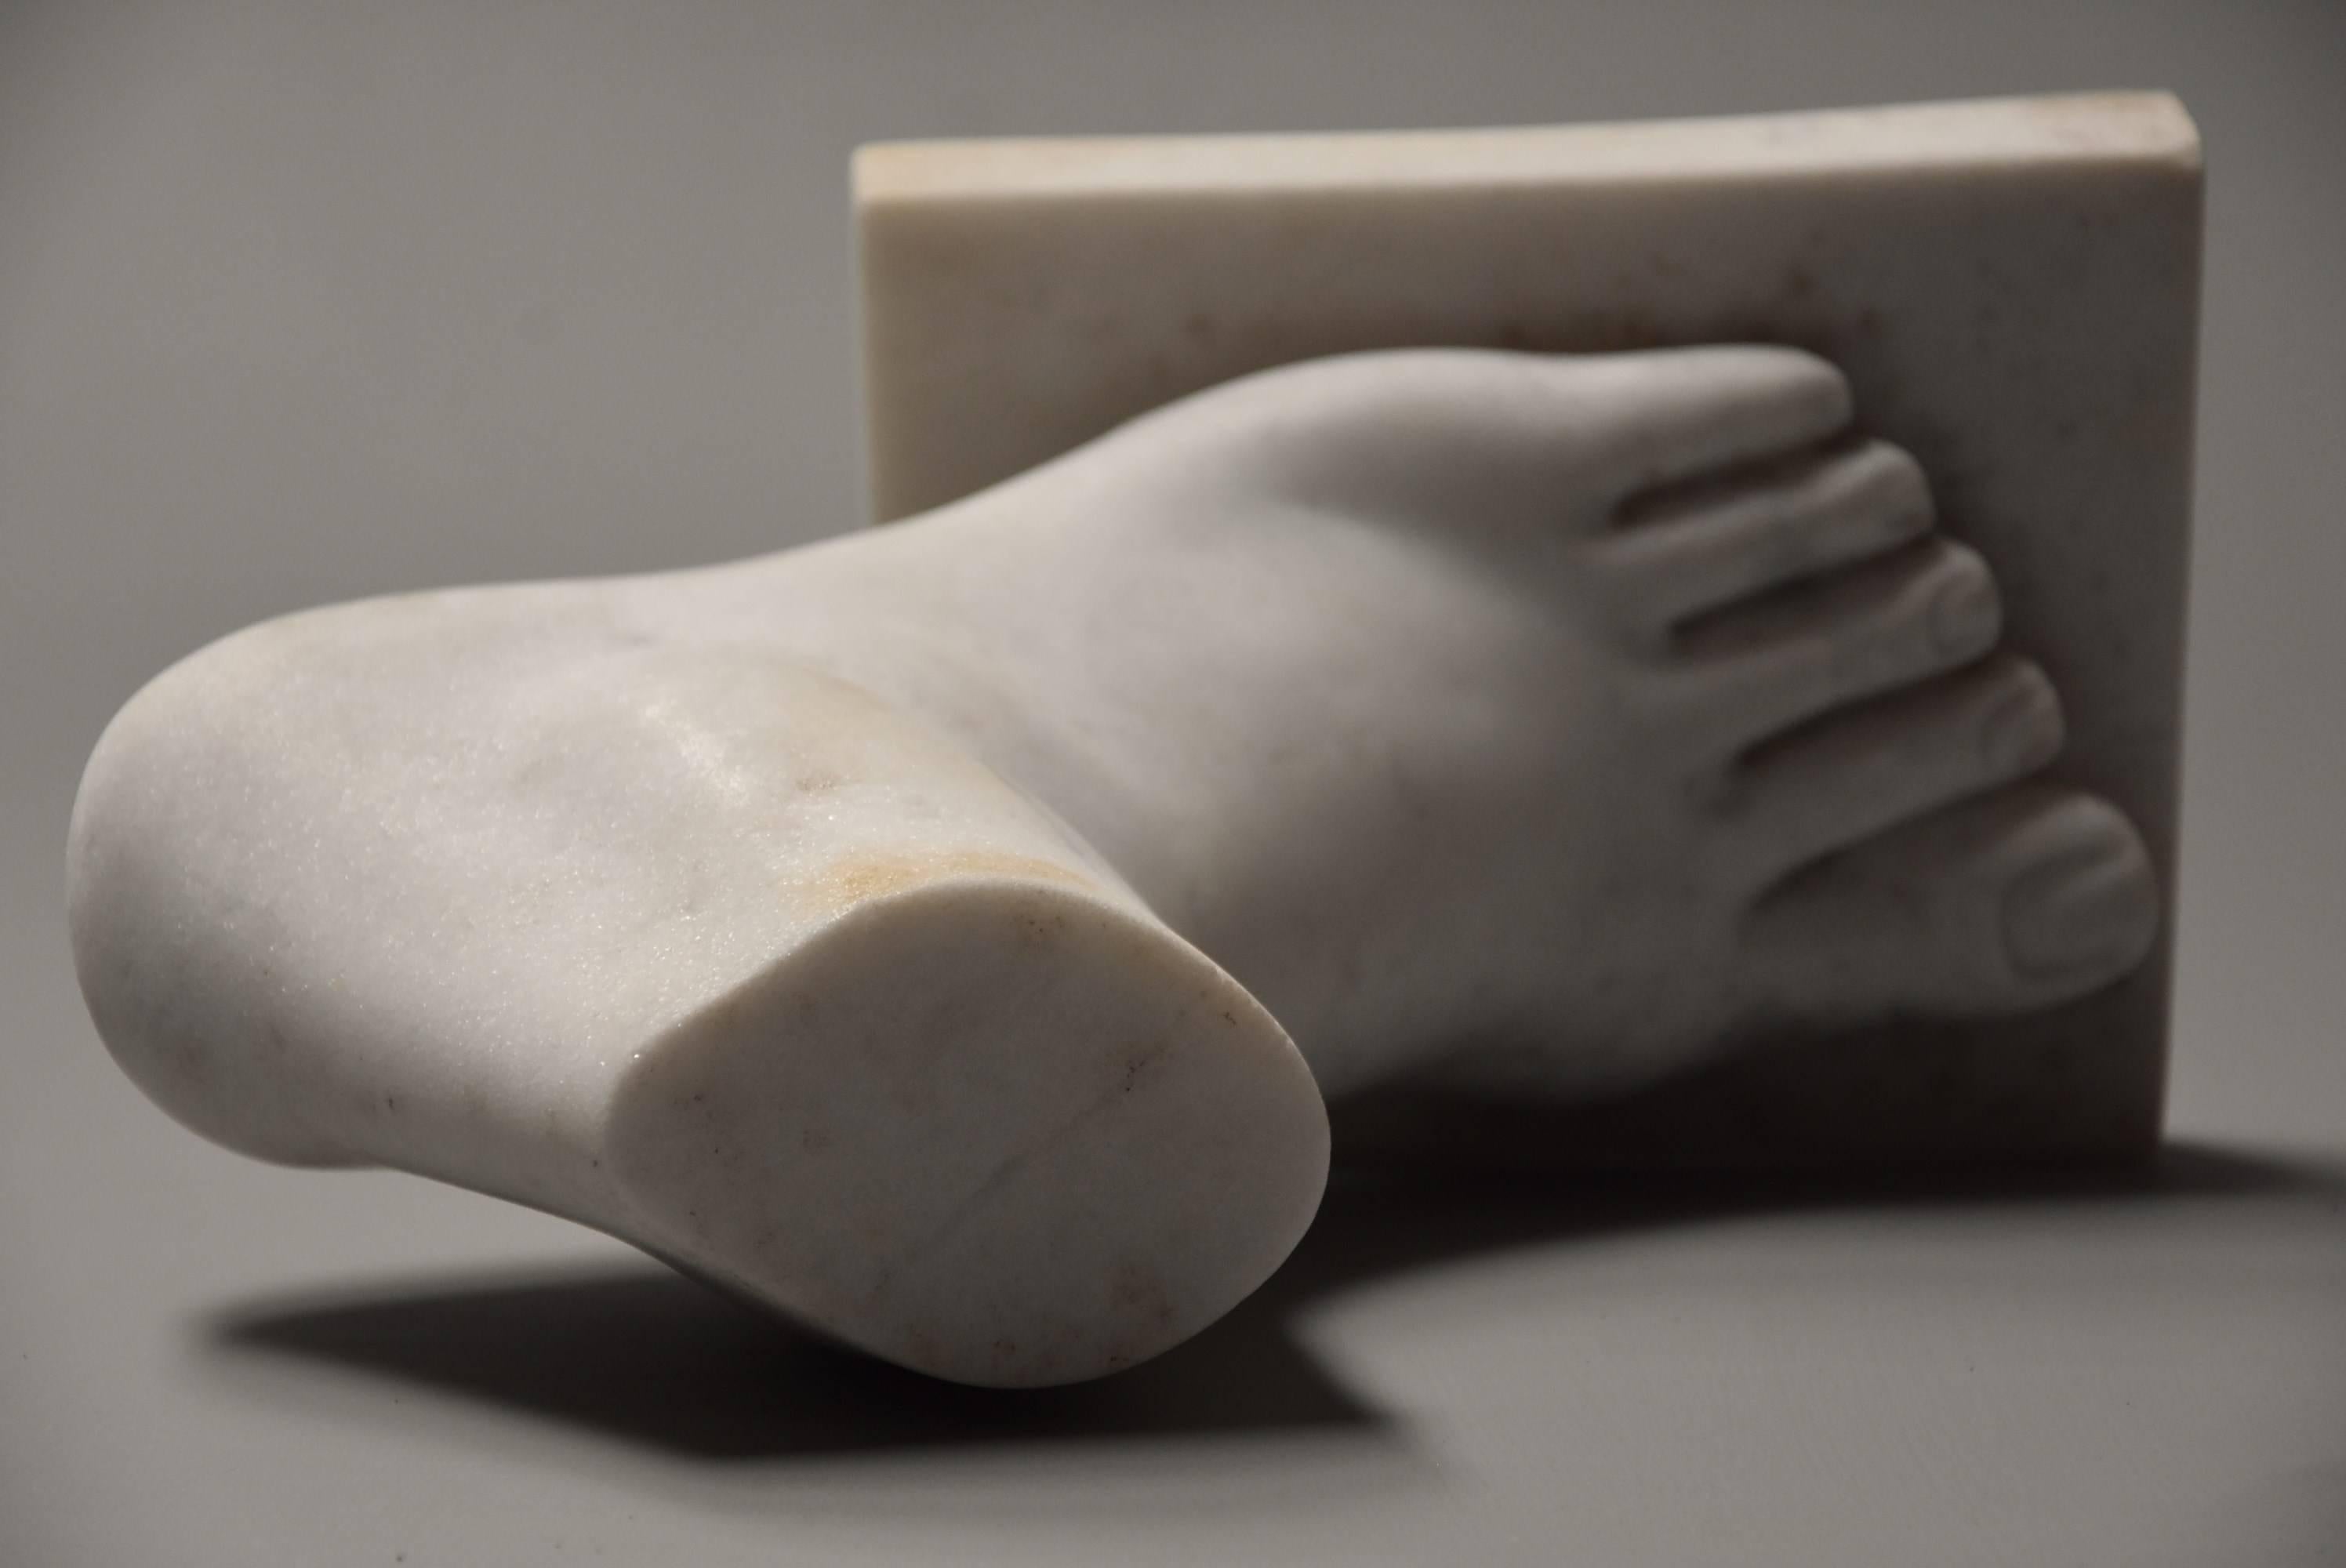 Late 19th Century Grand Tour Style Marble Sculpture of a Foot, after the Antique 4